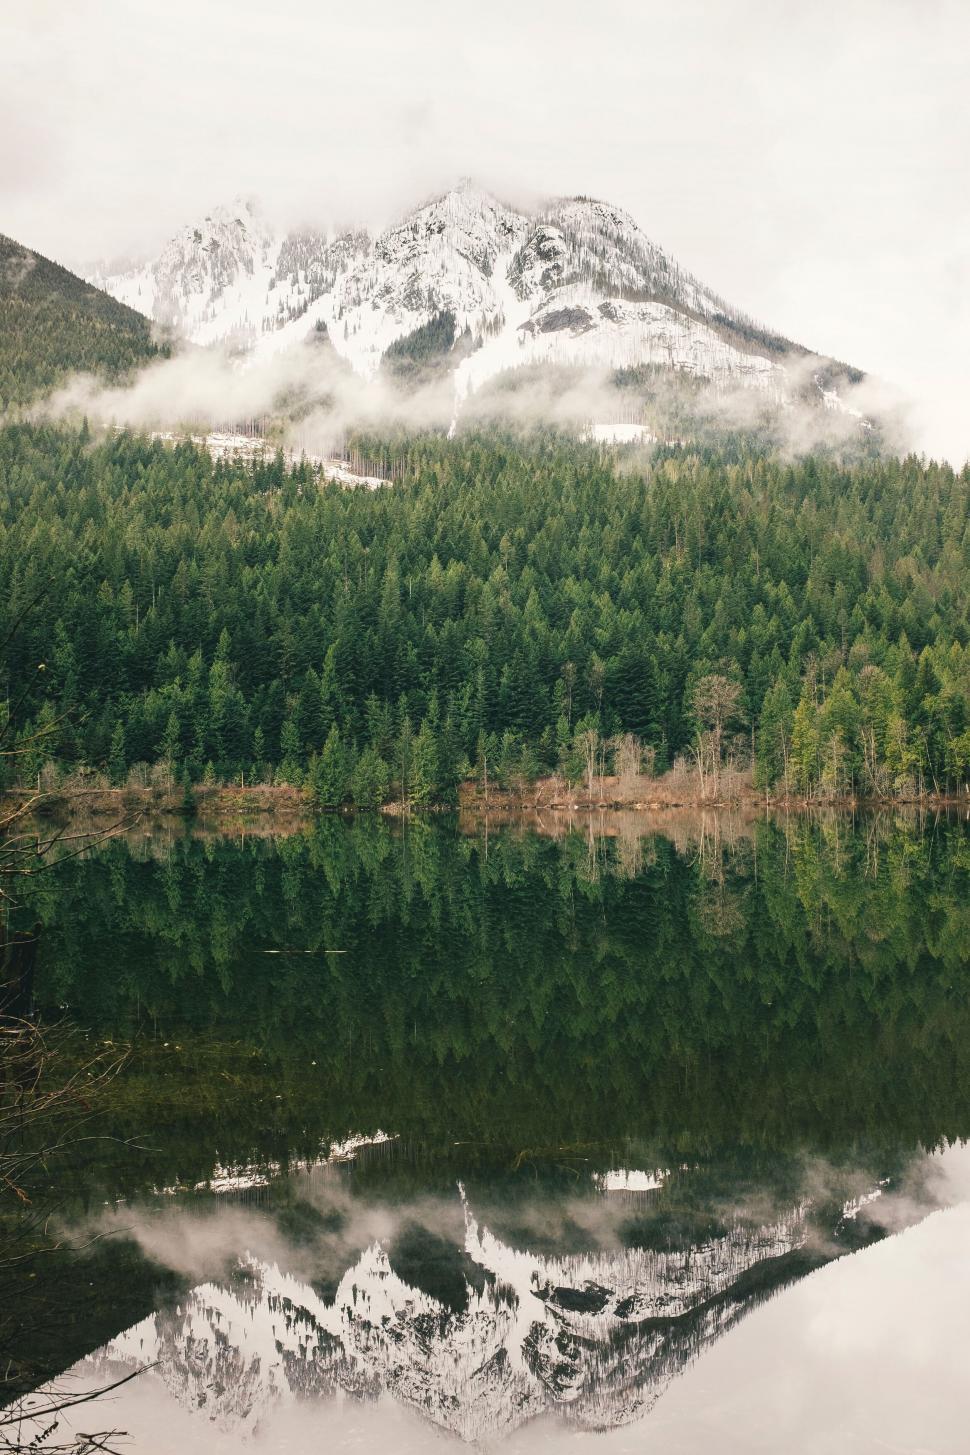 Free Image of Reflective mountain lake and forest 